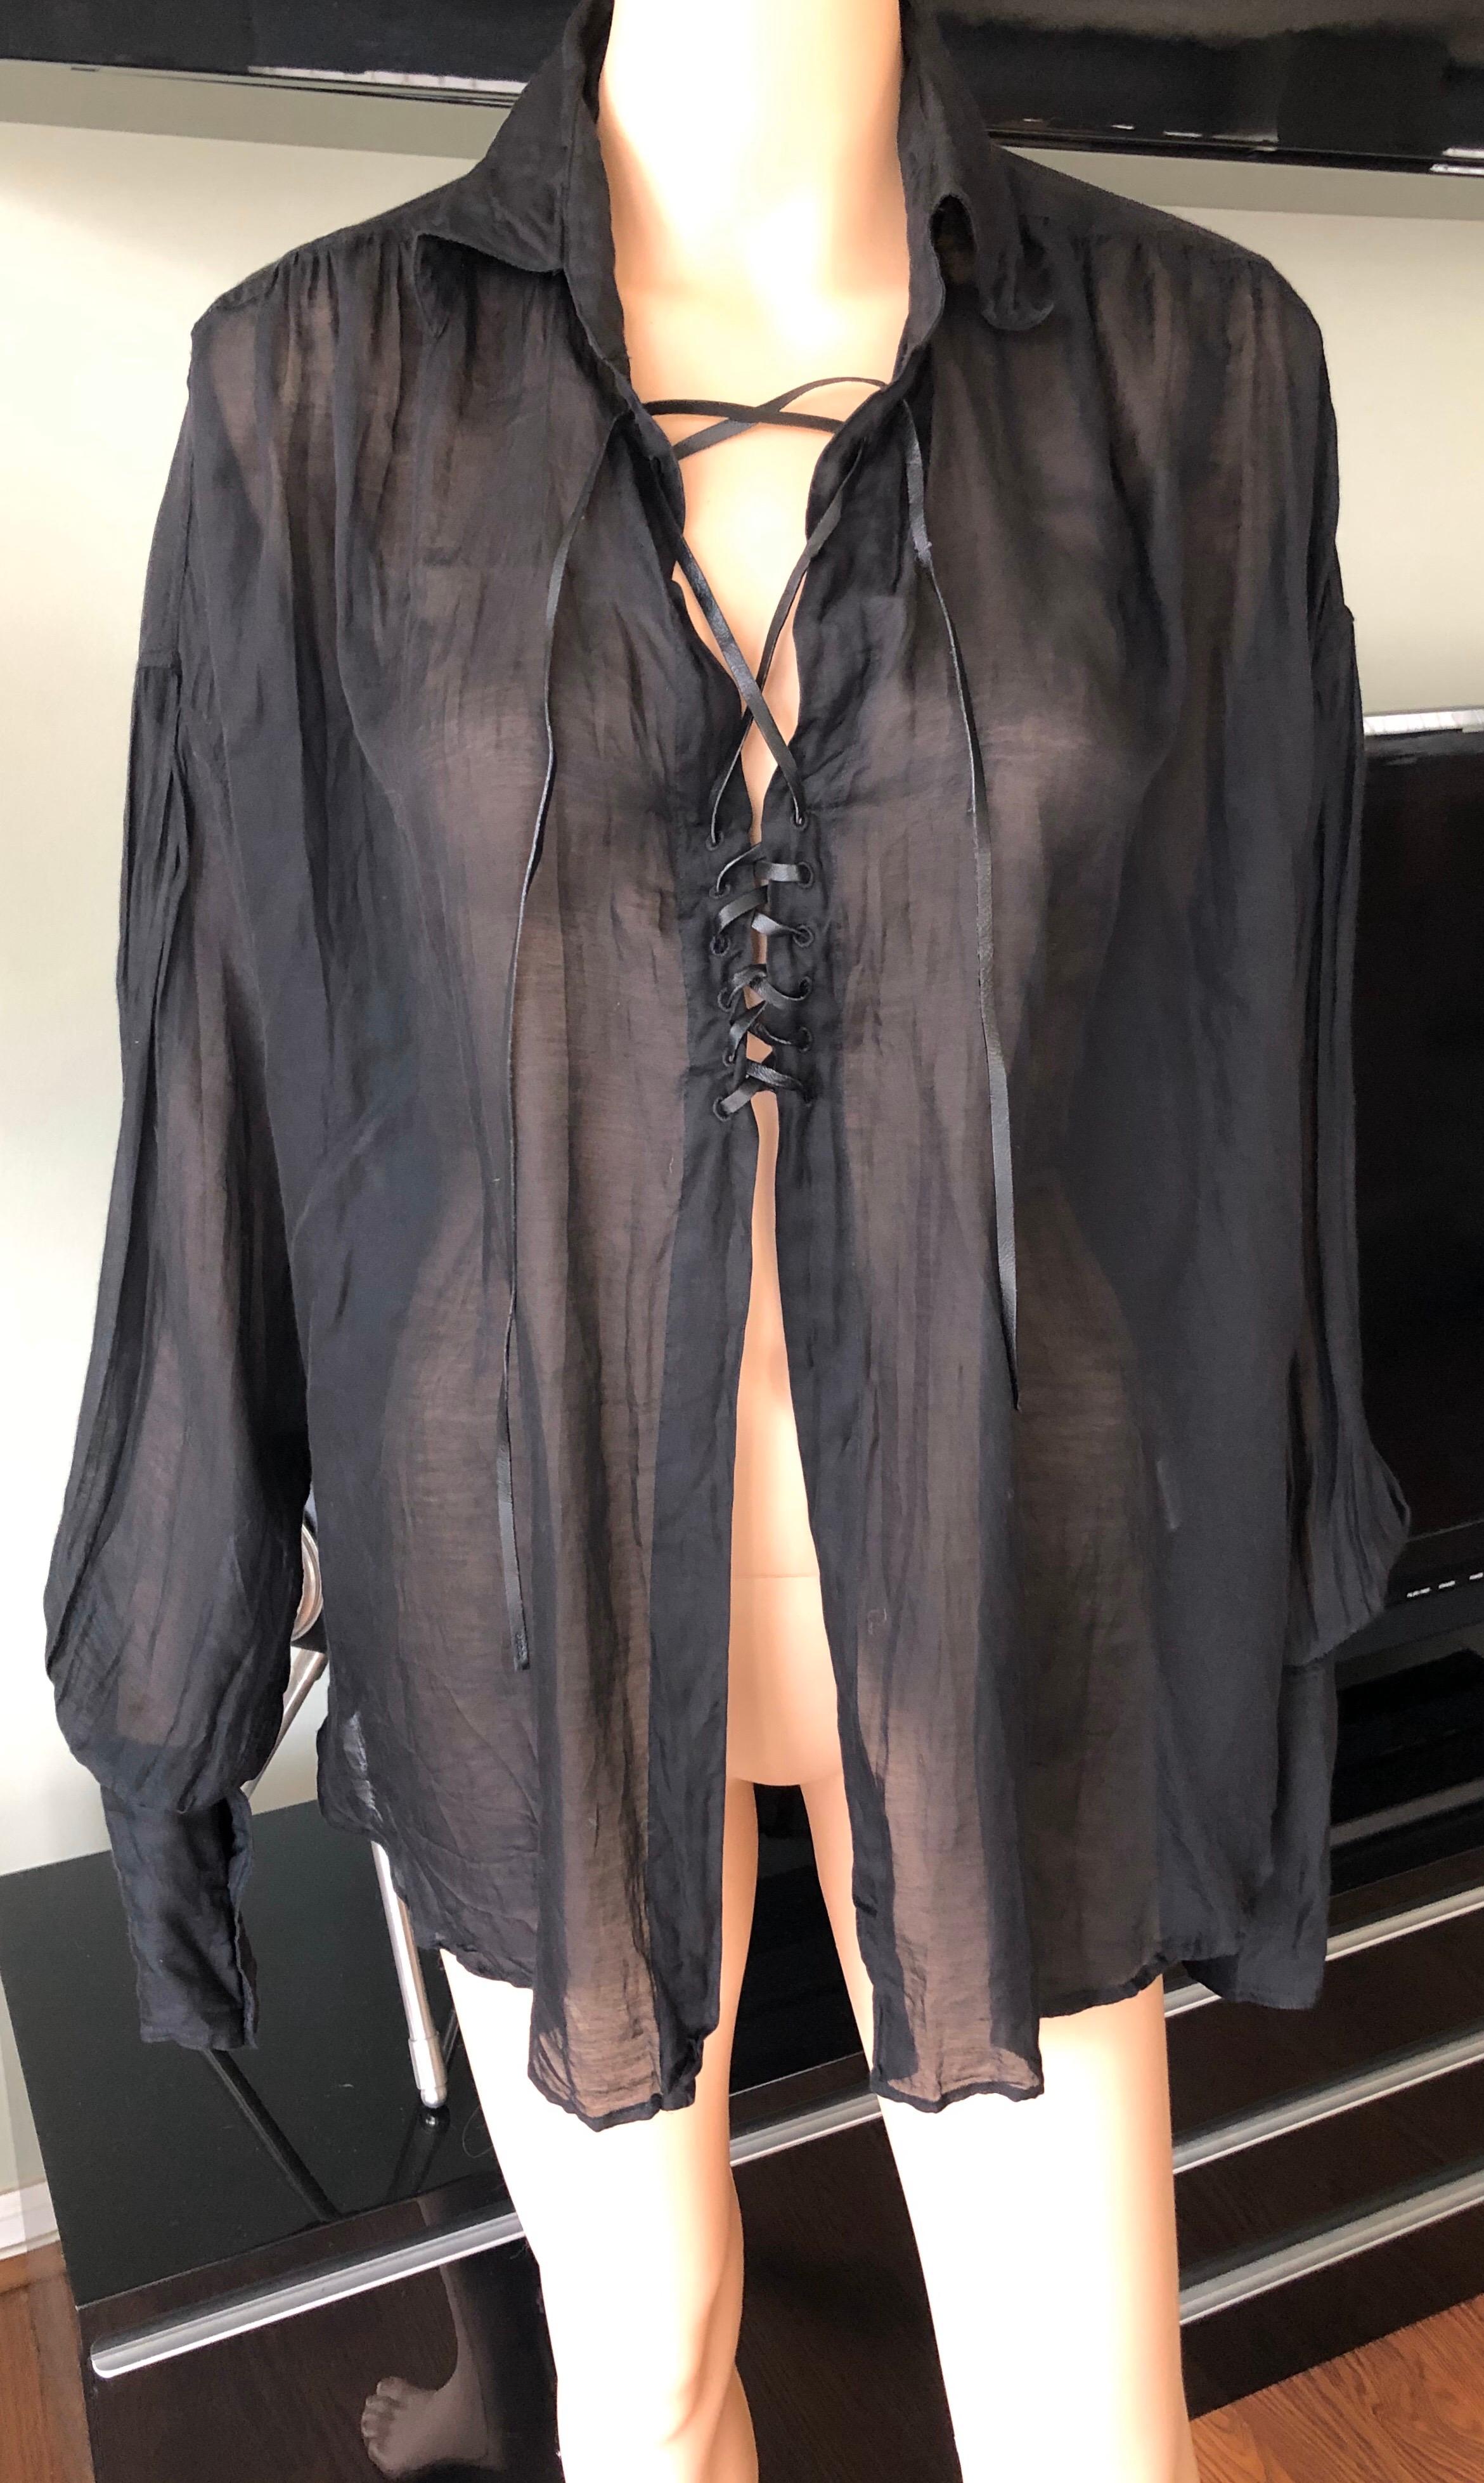 Tom Ford for Gucci F/W 2002 Sheer Plunging Lace-Up Black Tunic Shirt Blouse Top IT 40